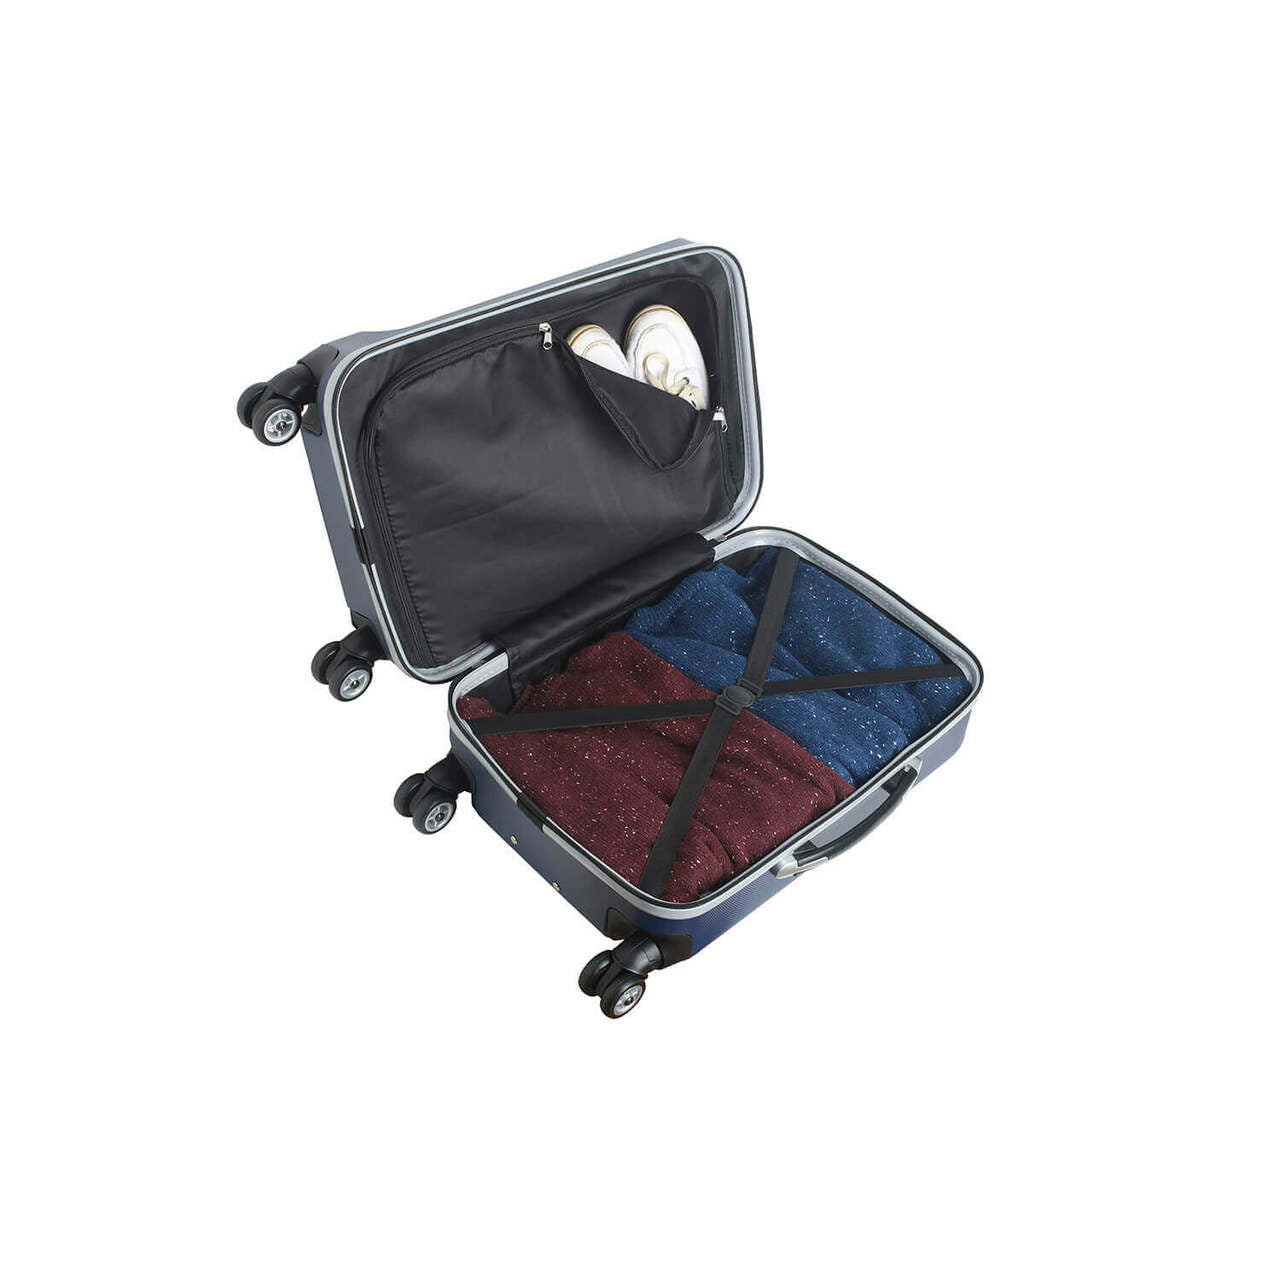 Brooklyn Nets 20" Navy Domestic Carry-on Spinner